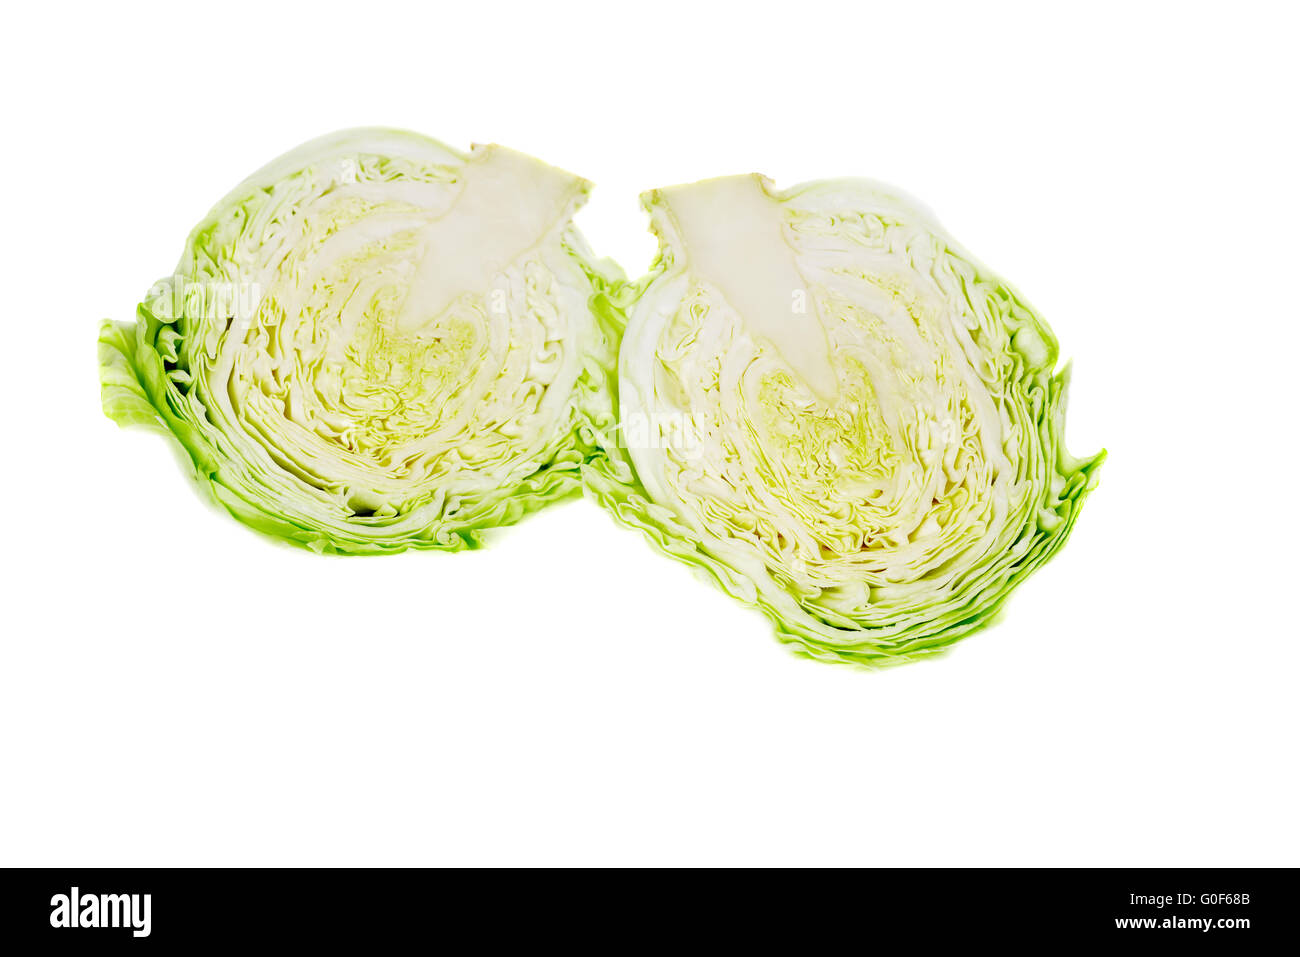 Cutted cabbage isolated on white Stock Photo